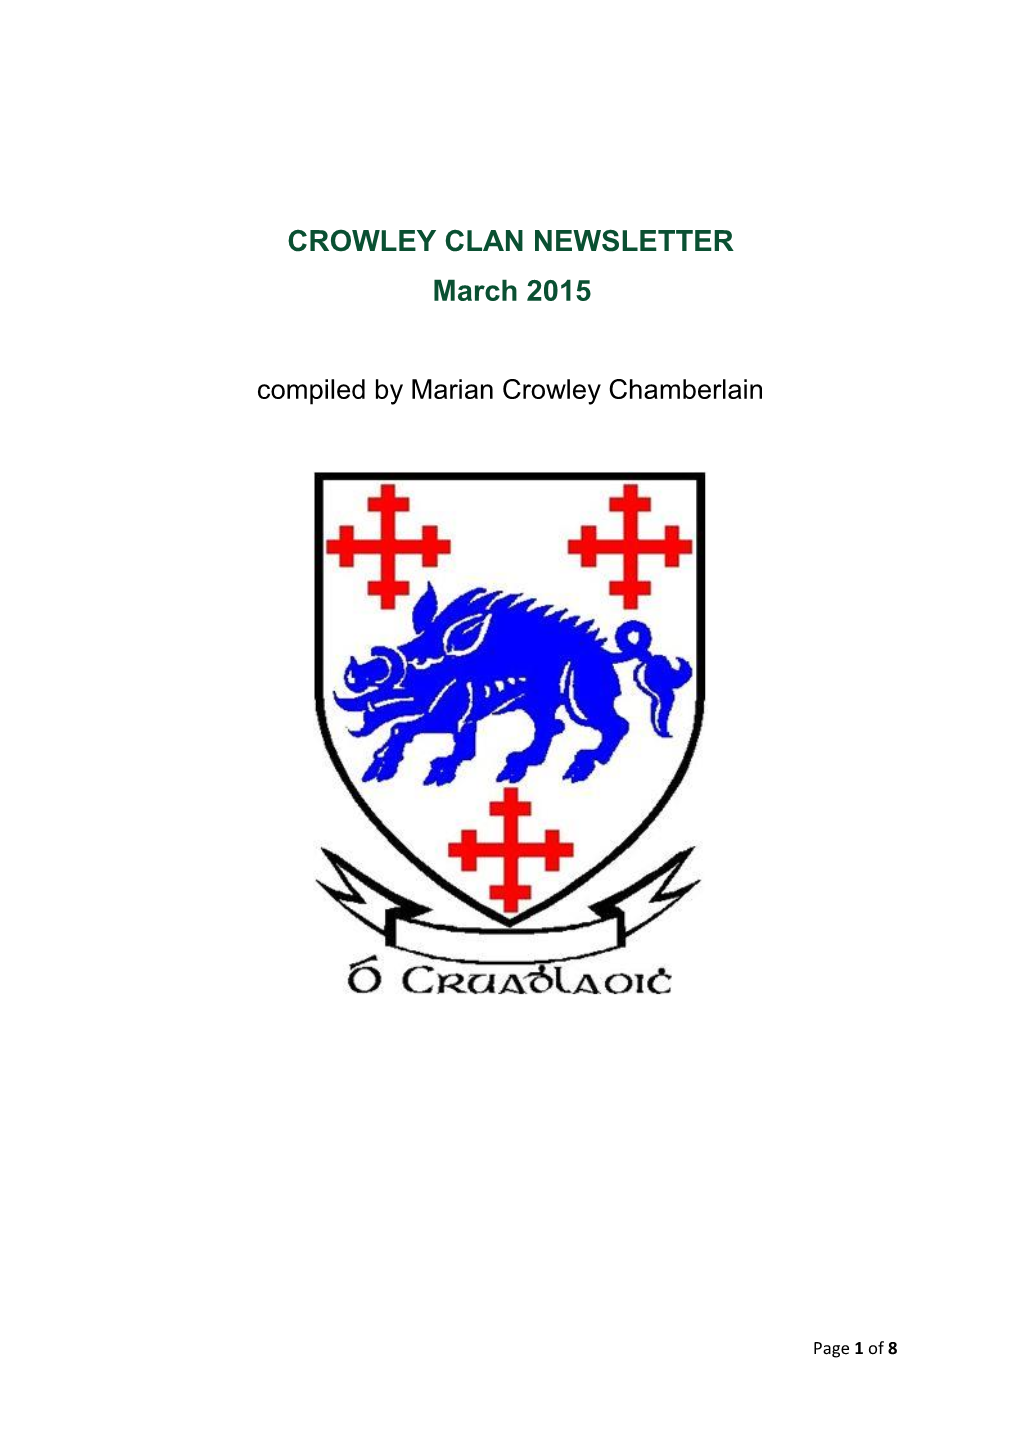 CROWLEY CLAN NEWSLETTER March 2015 Compiled by Marian Crowley Chamberlain